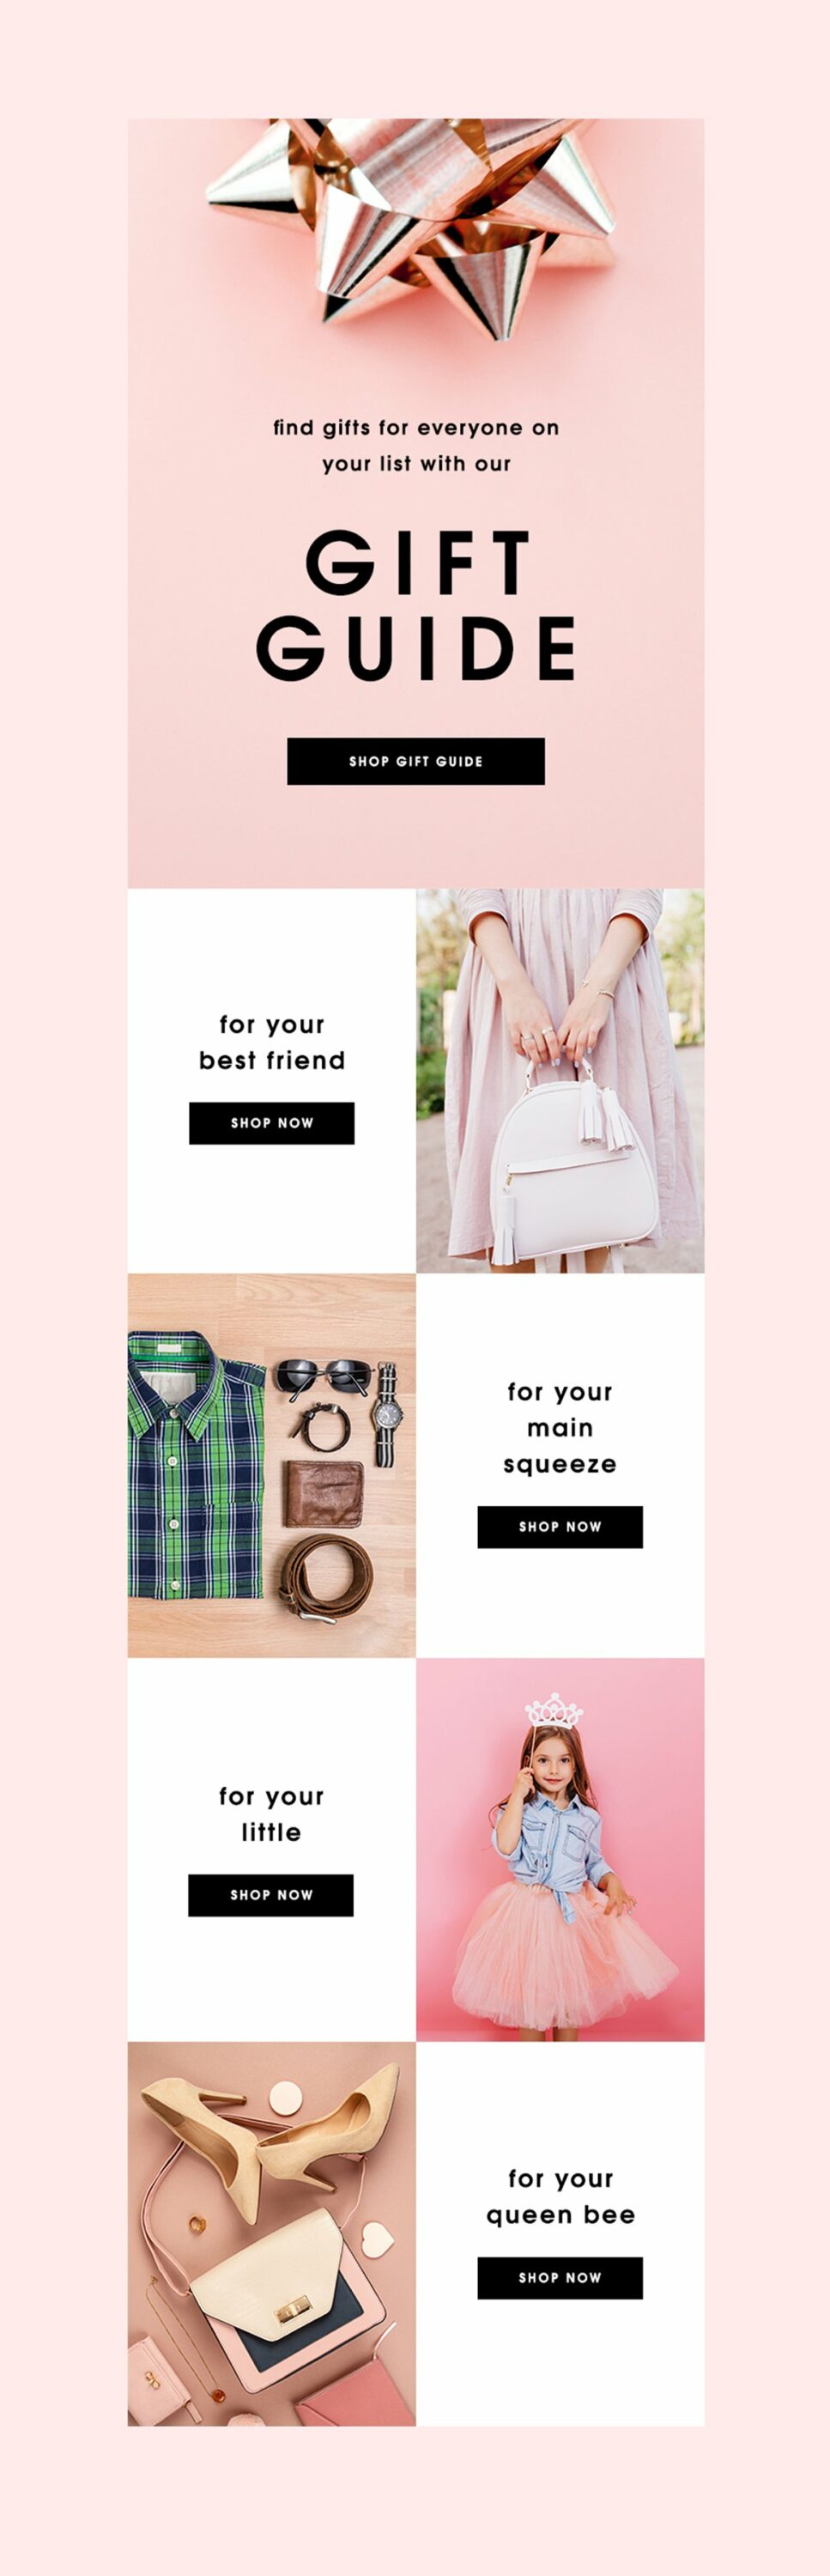 Black lettering "Gift guide" and gift guide email template on a pink background.